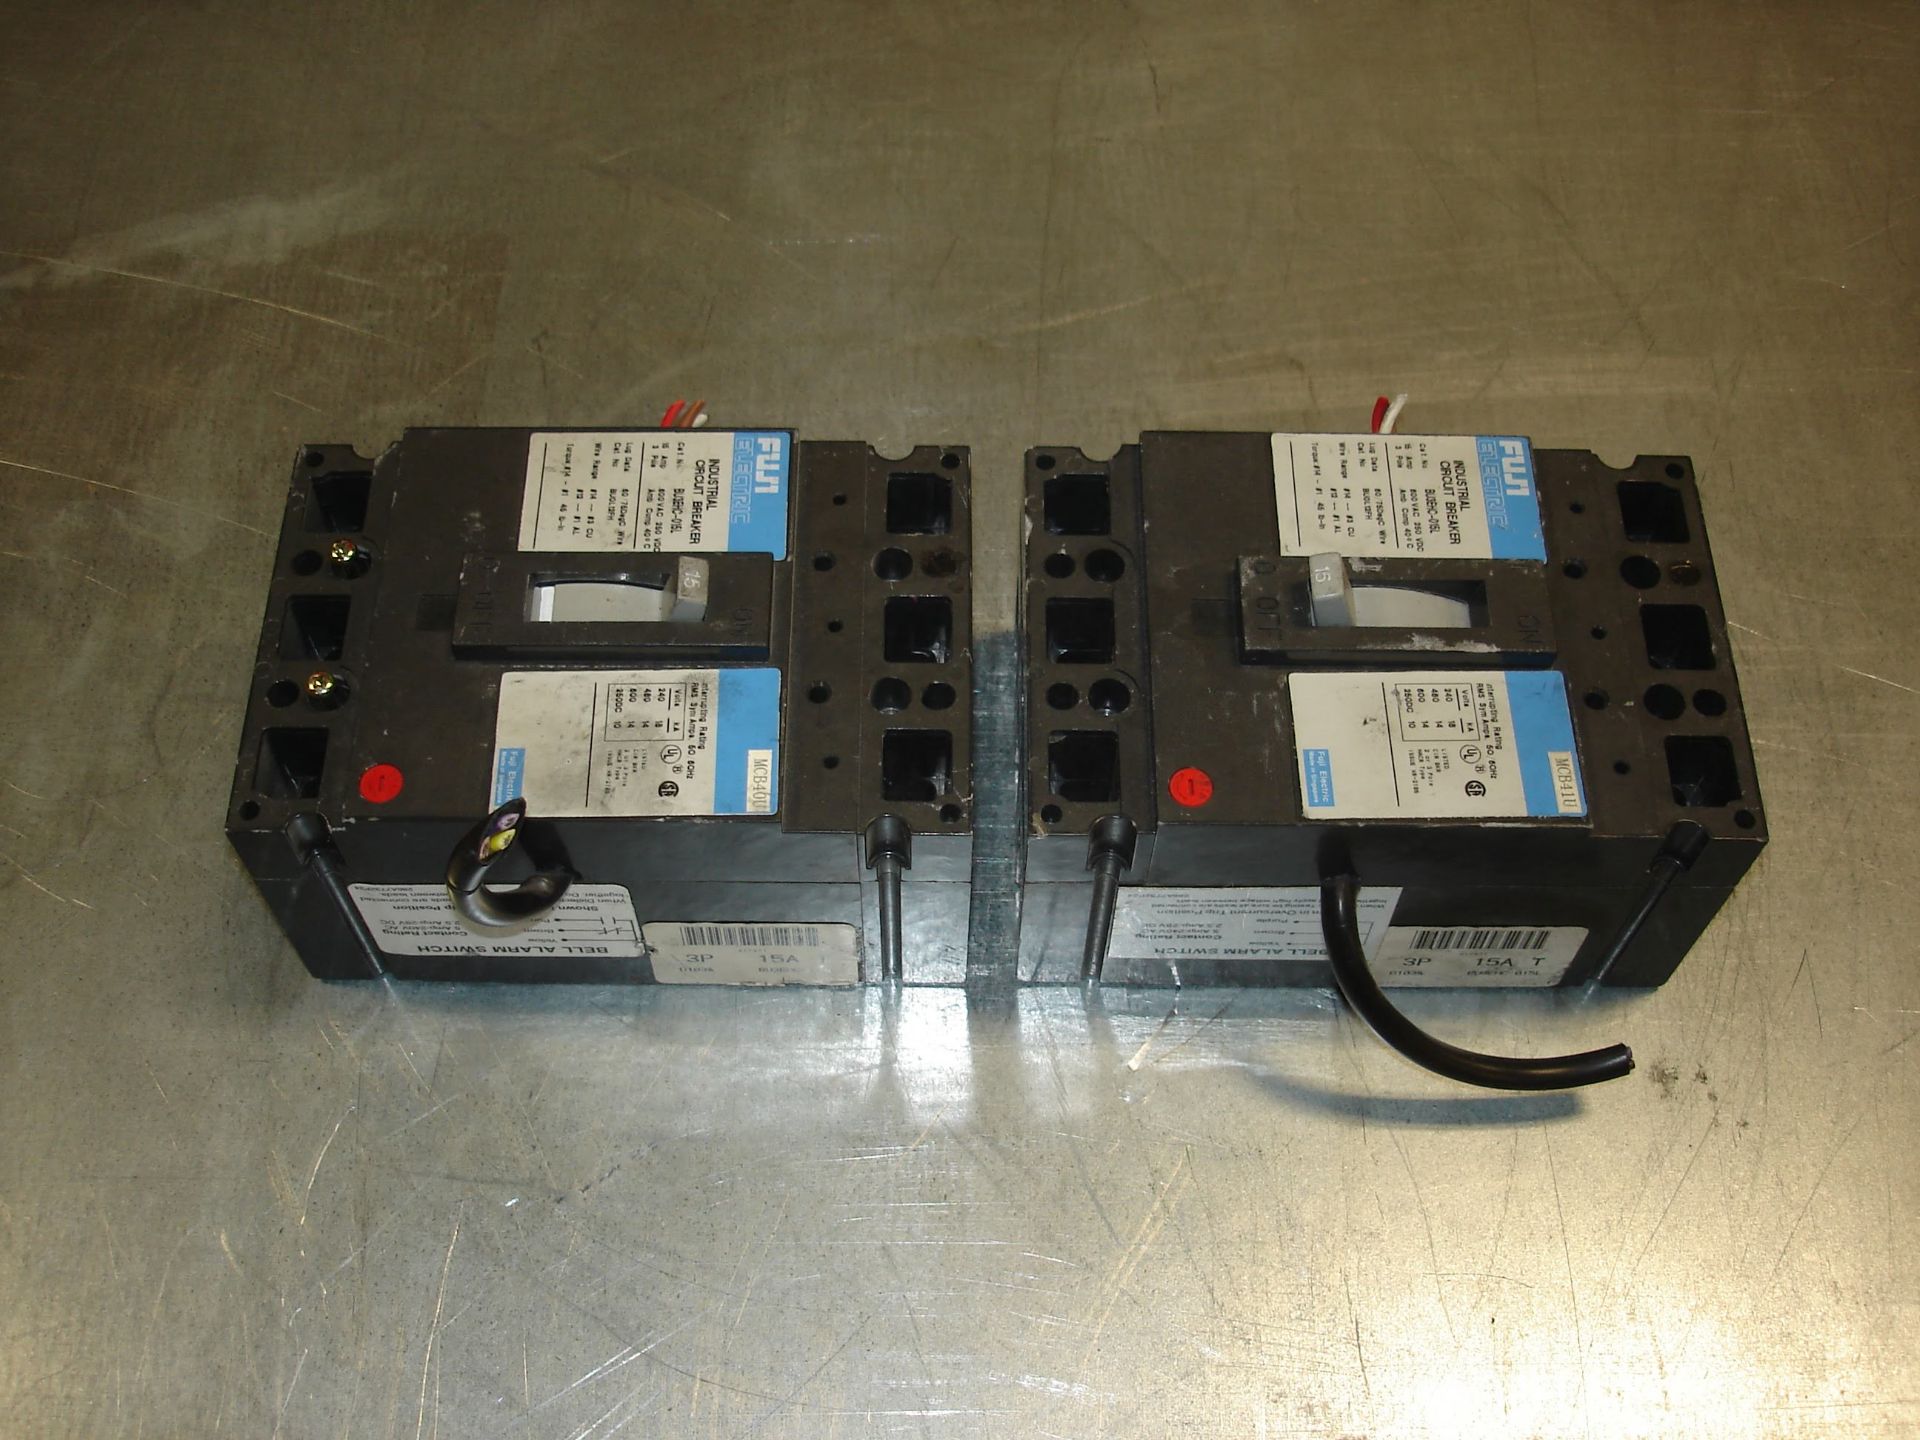 (2) BU3EHC-015L FUJI ELECTRIC INDUSTRIAL CIRCUIT BREAKER USED Pickup your lot(s) for free! - Image 4 of 5